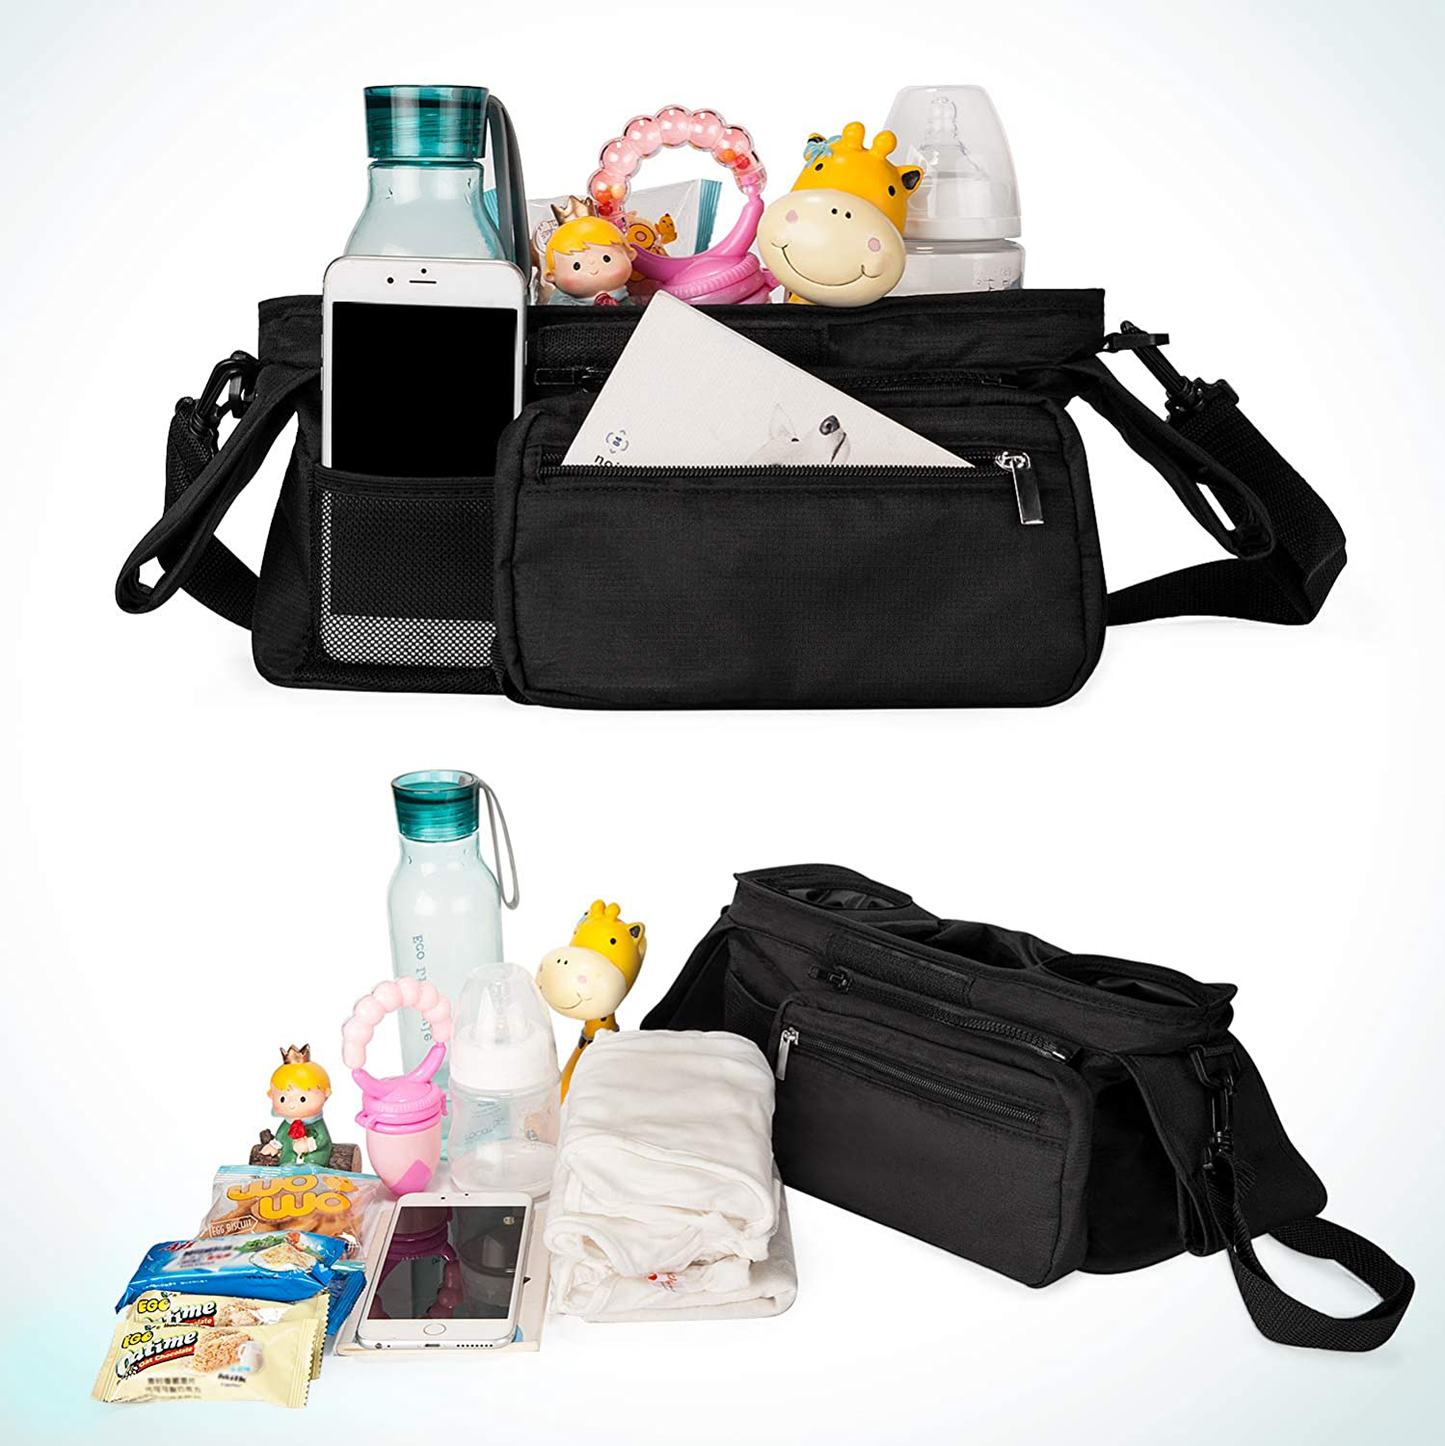 Universal Stroller Organizer with Insulated Cup Holder by Momcozy - Detachable Phone Bag & Shoulder Strap, Fits for Stroller like Uppababy, Baby Jogger, Britax, Bugaboo, BOB, Umbrella and Pet Stroller Animals & Pet Supplies > Pet Supplies > Dog Supplies > Dog Treadmills Momcozy   